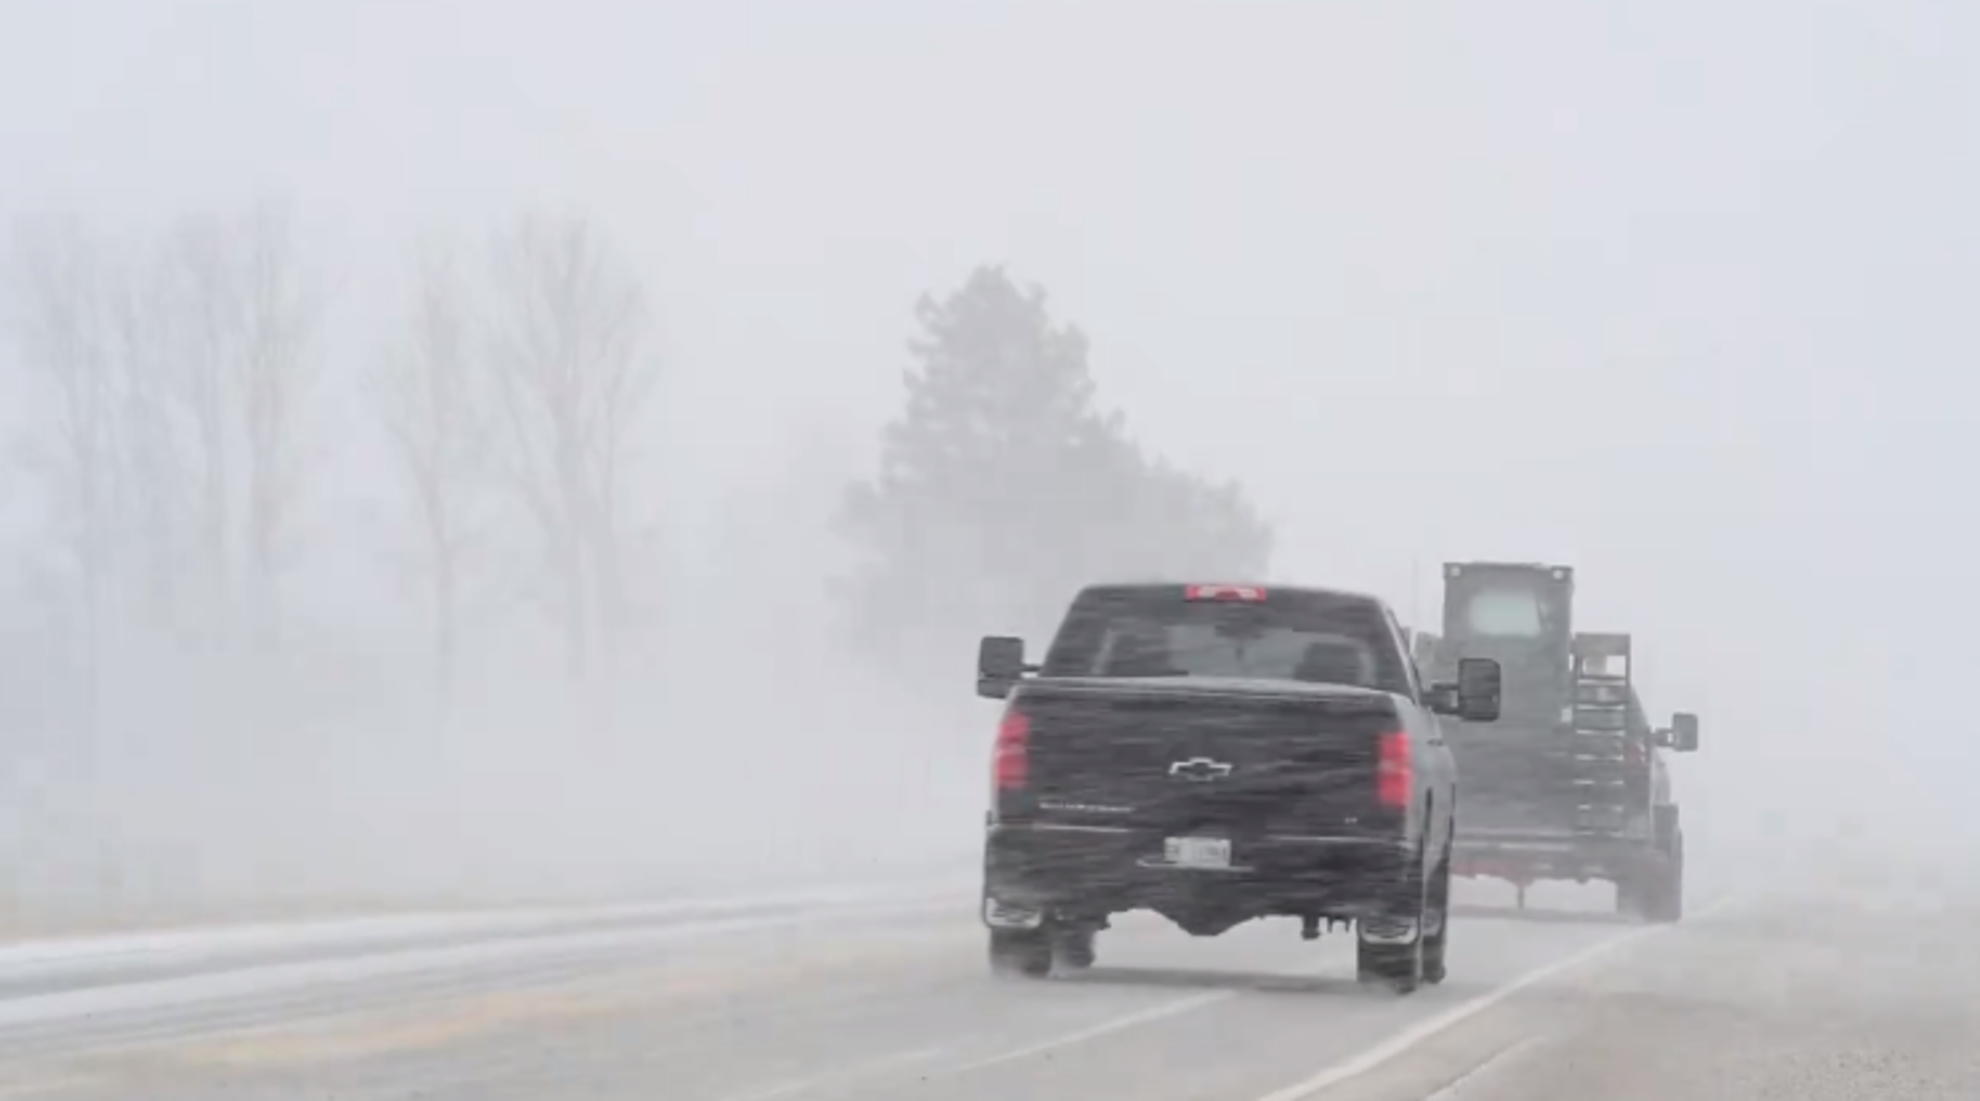 Potent snow squalls continue over southern Ontario, another major warm-up coming